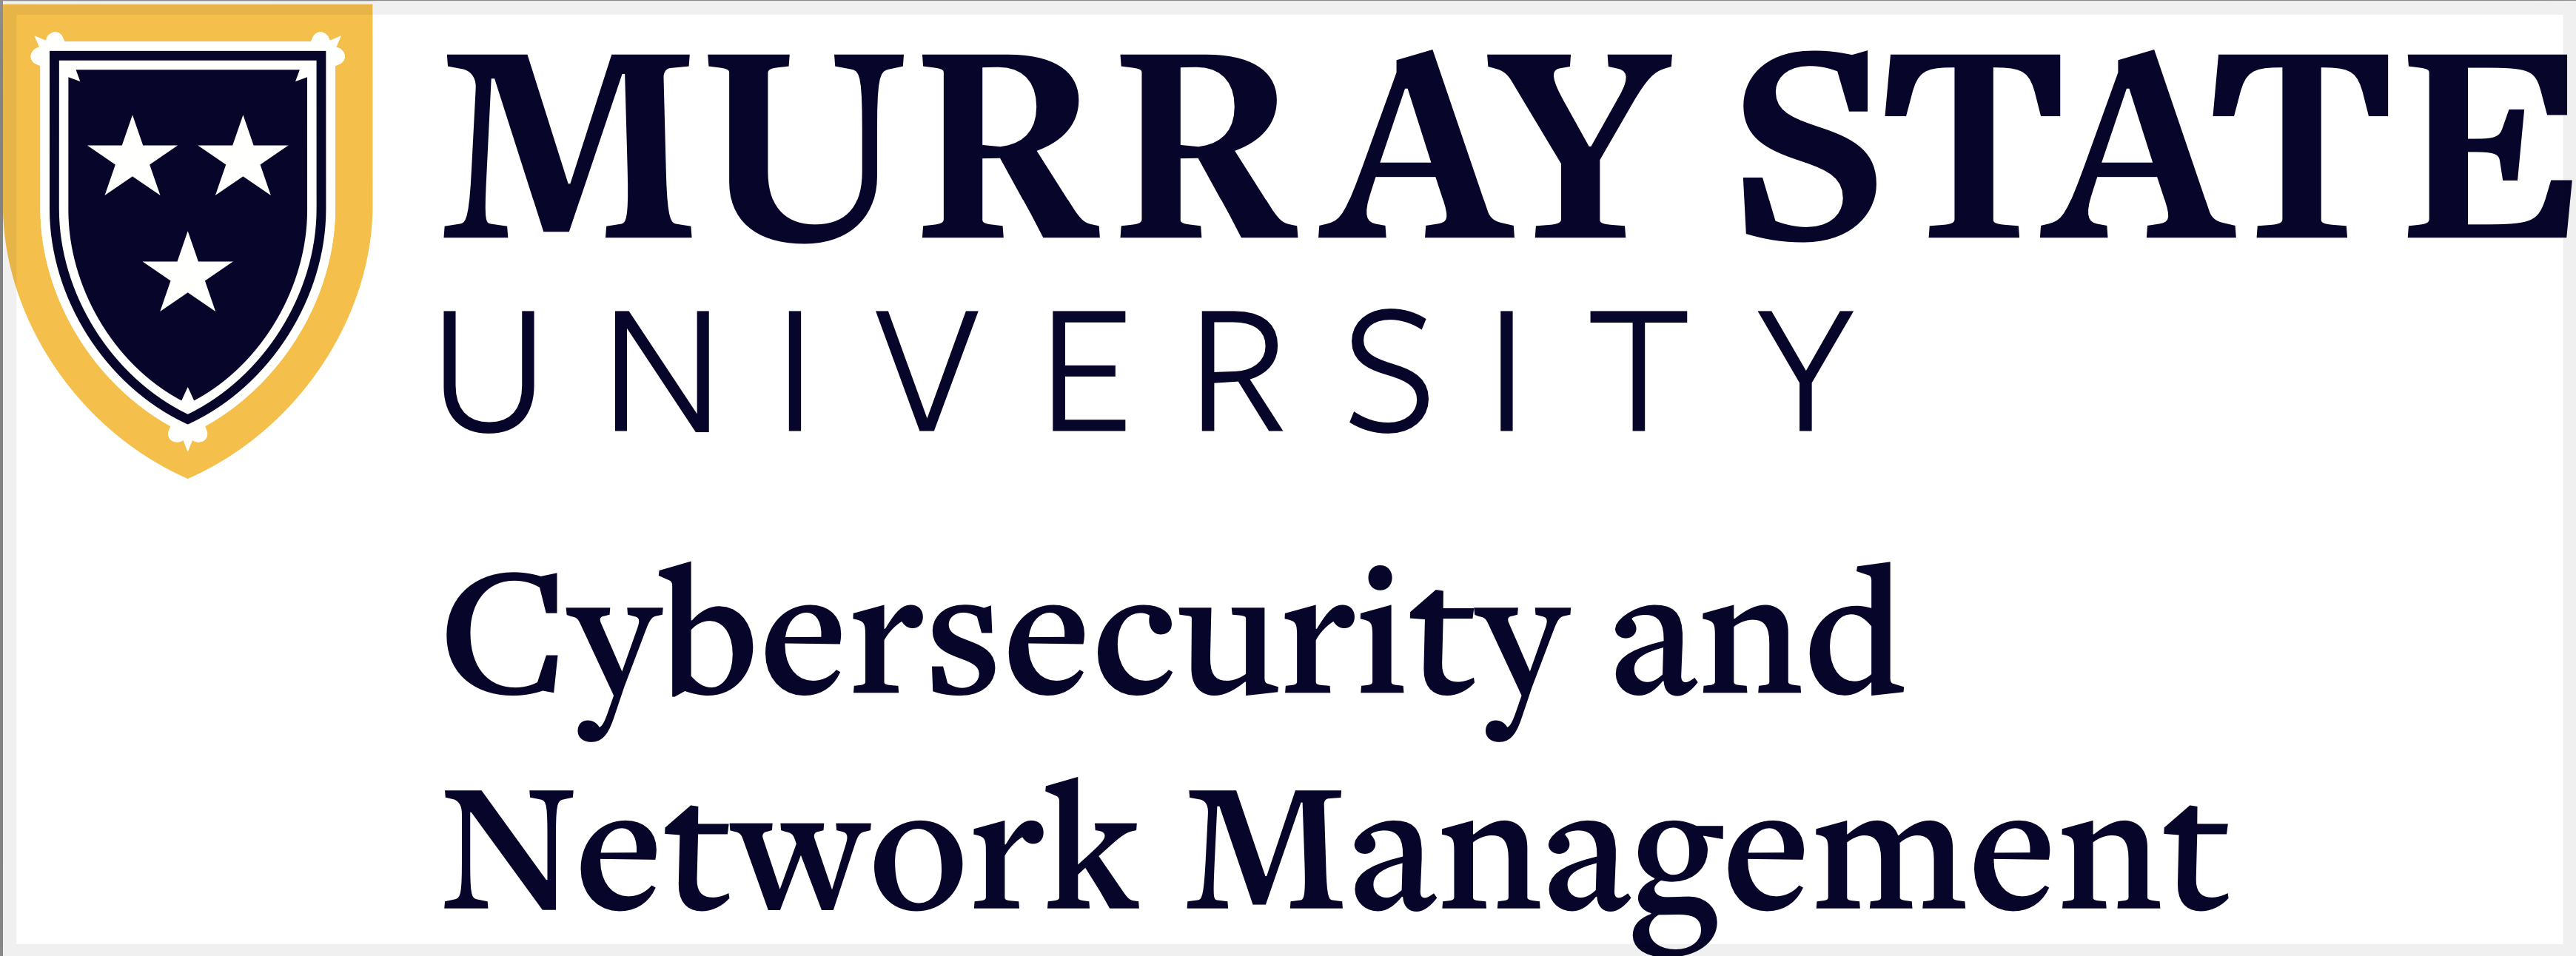 Murray State University Cybersecurity and Network Management Program